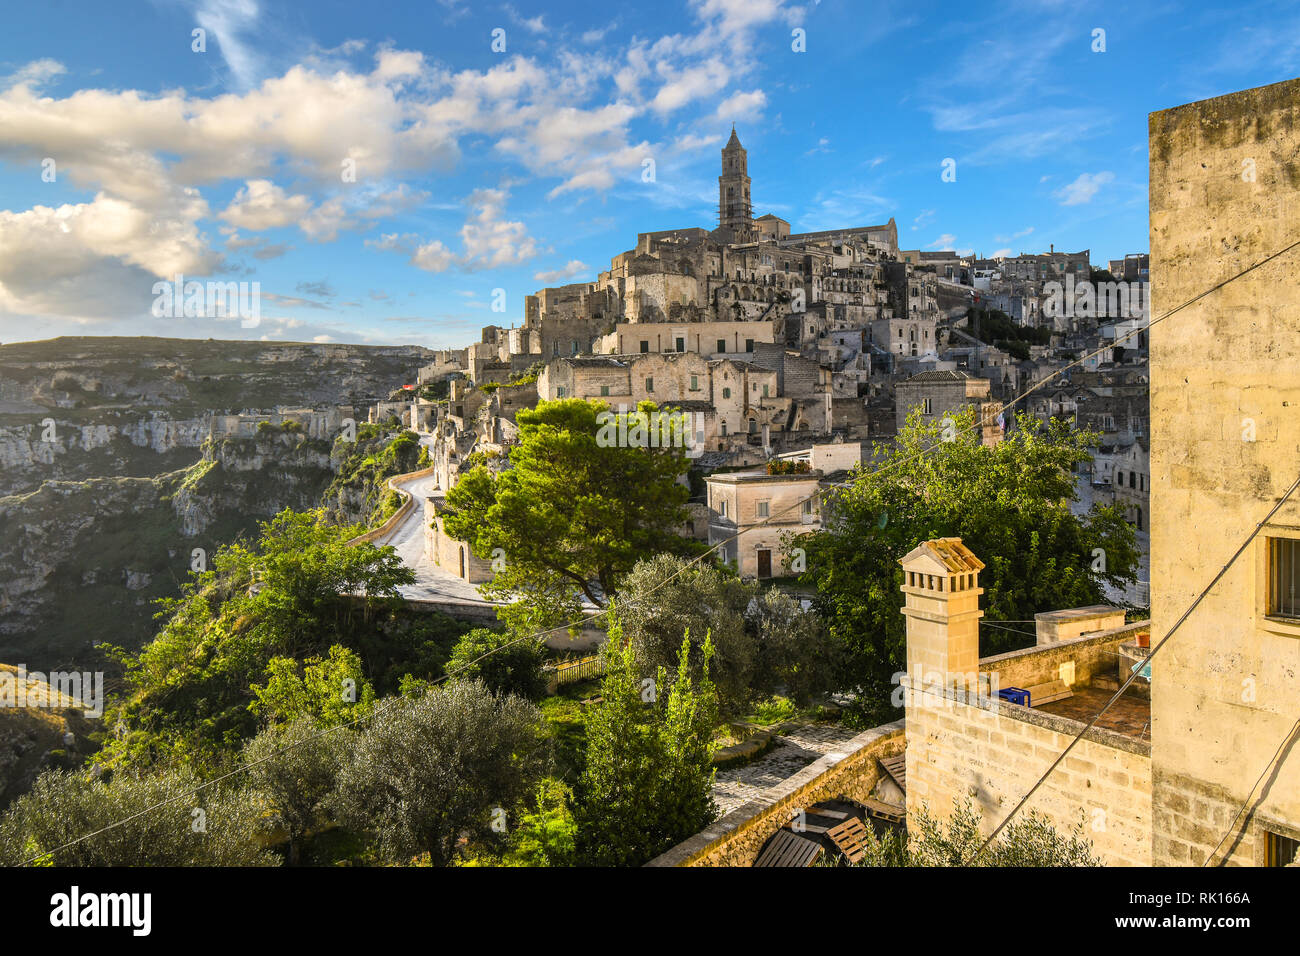 View of the ancient city of Matera, Italy, including the old town, tourist street and mountain path, Sasso Barisano tower and the steep ravine canyon Stock Photo